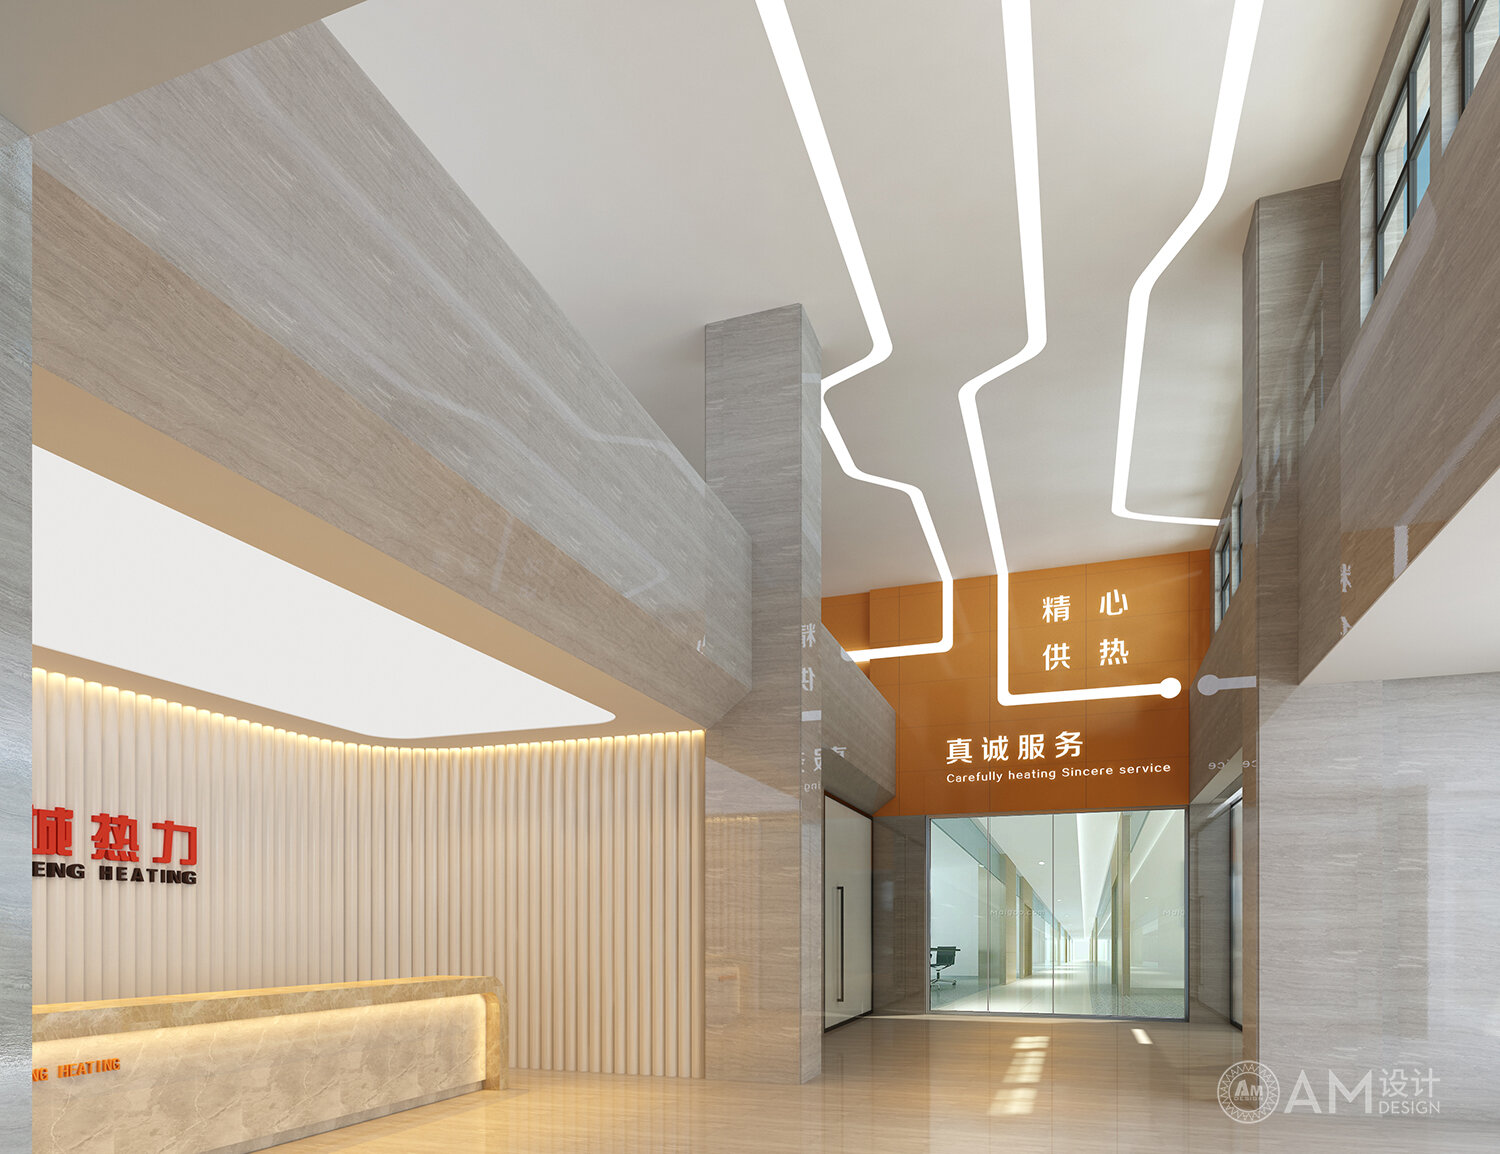 AM DESIGN | Lobby Design of Thermal Office Building, Tongzhou New City, Beijing